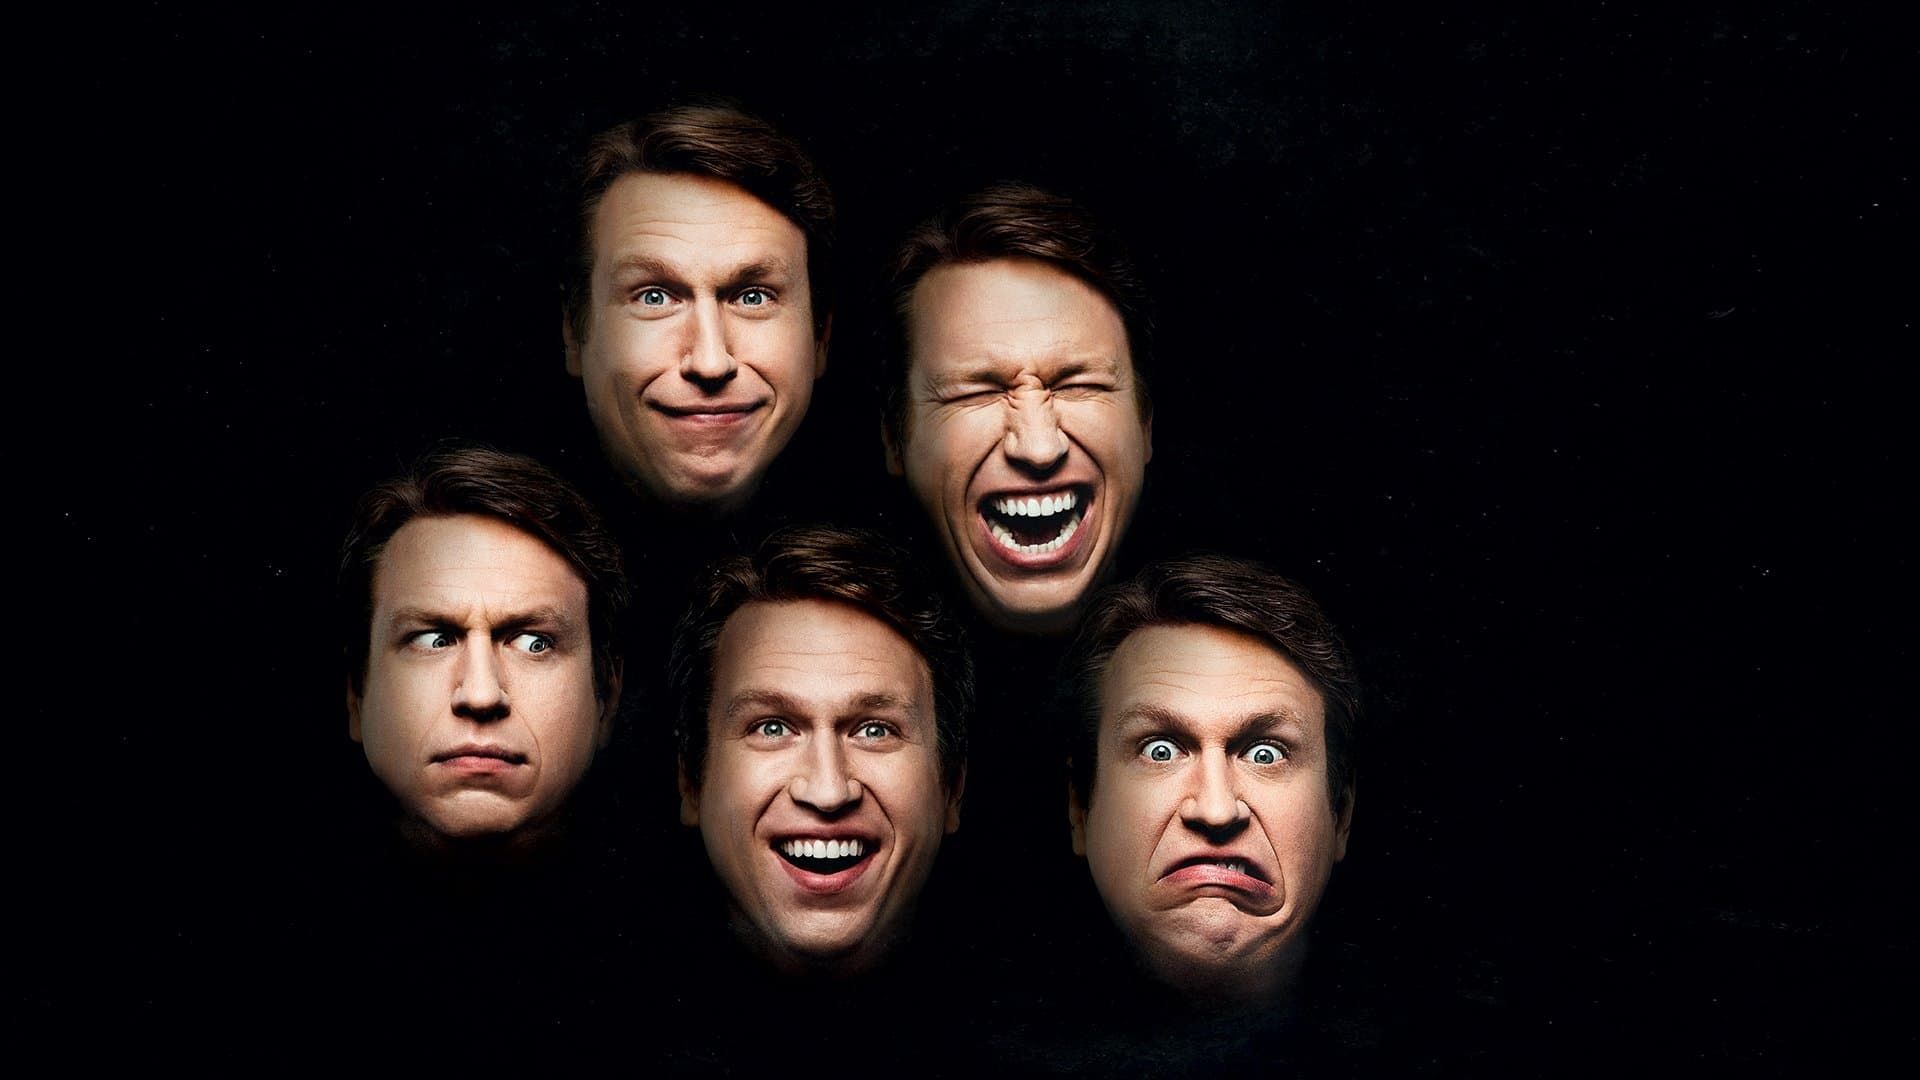 Pete Holmes: Faces and Sounds Backdrop